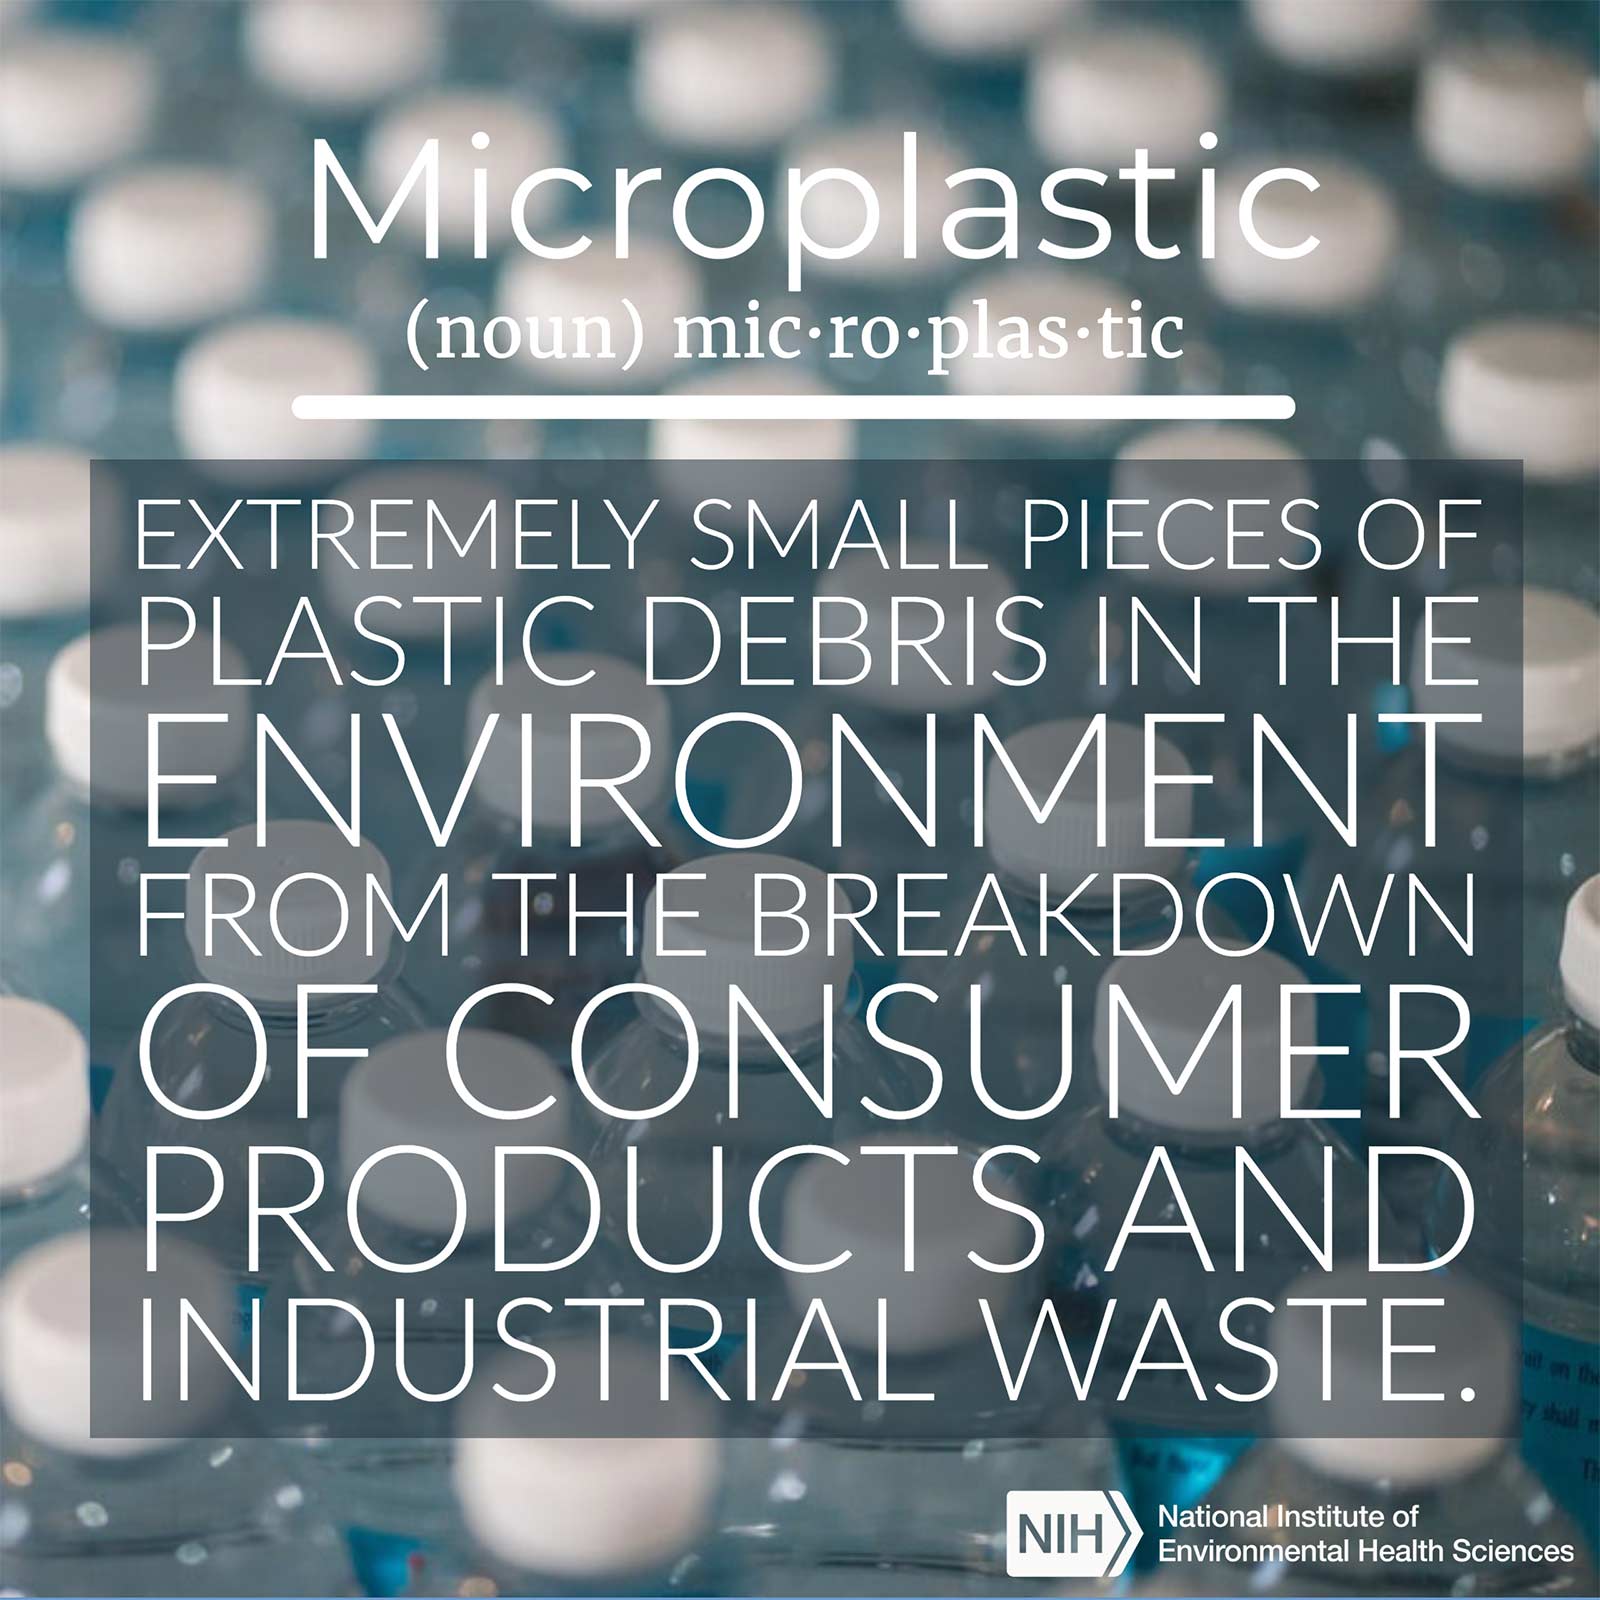 Microplastic (noun) defined as &#39;extremely small pieces of plastic debris in the environment from the breakdown of consumer products and industrial waste.&#39;